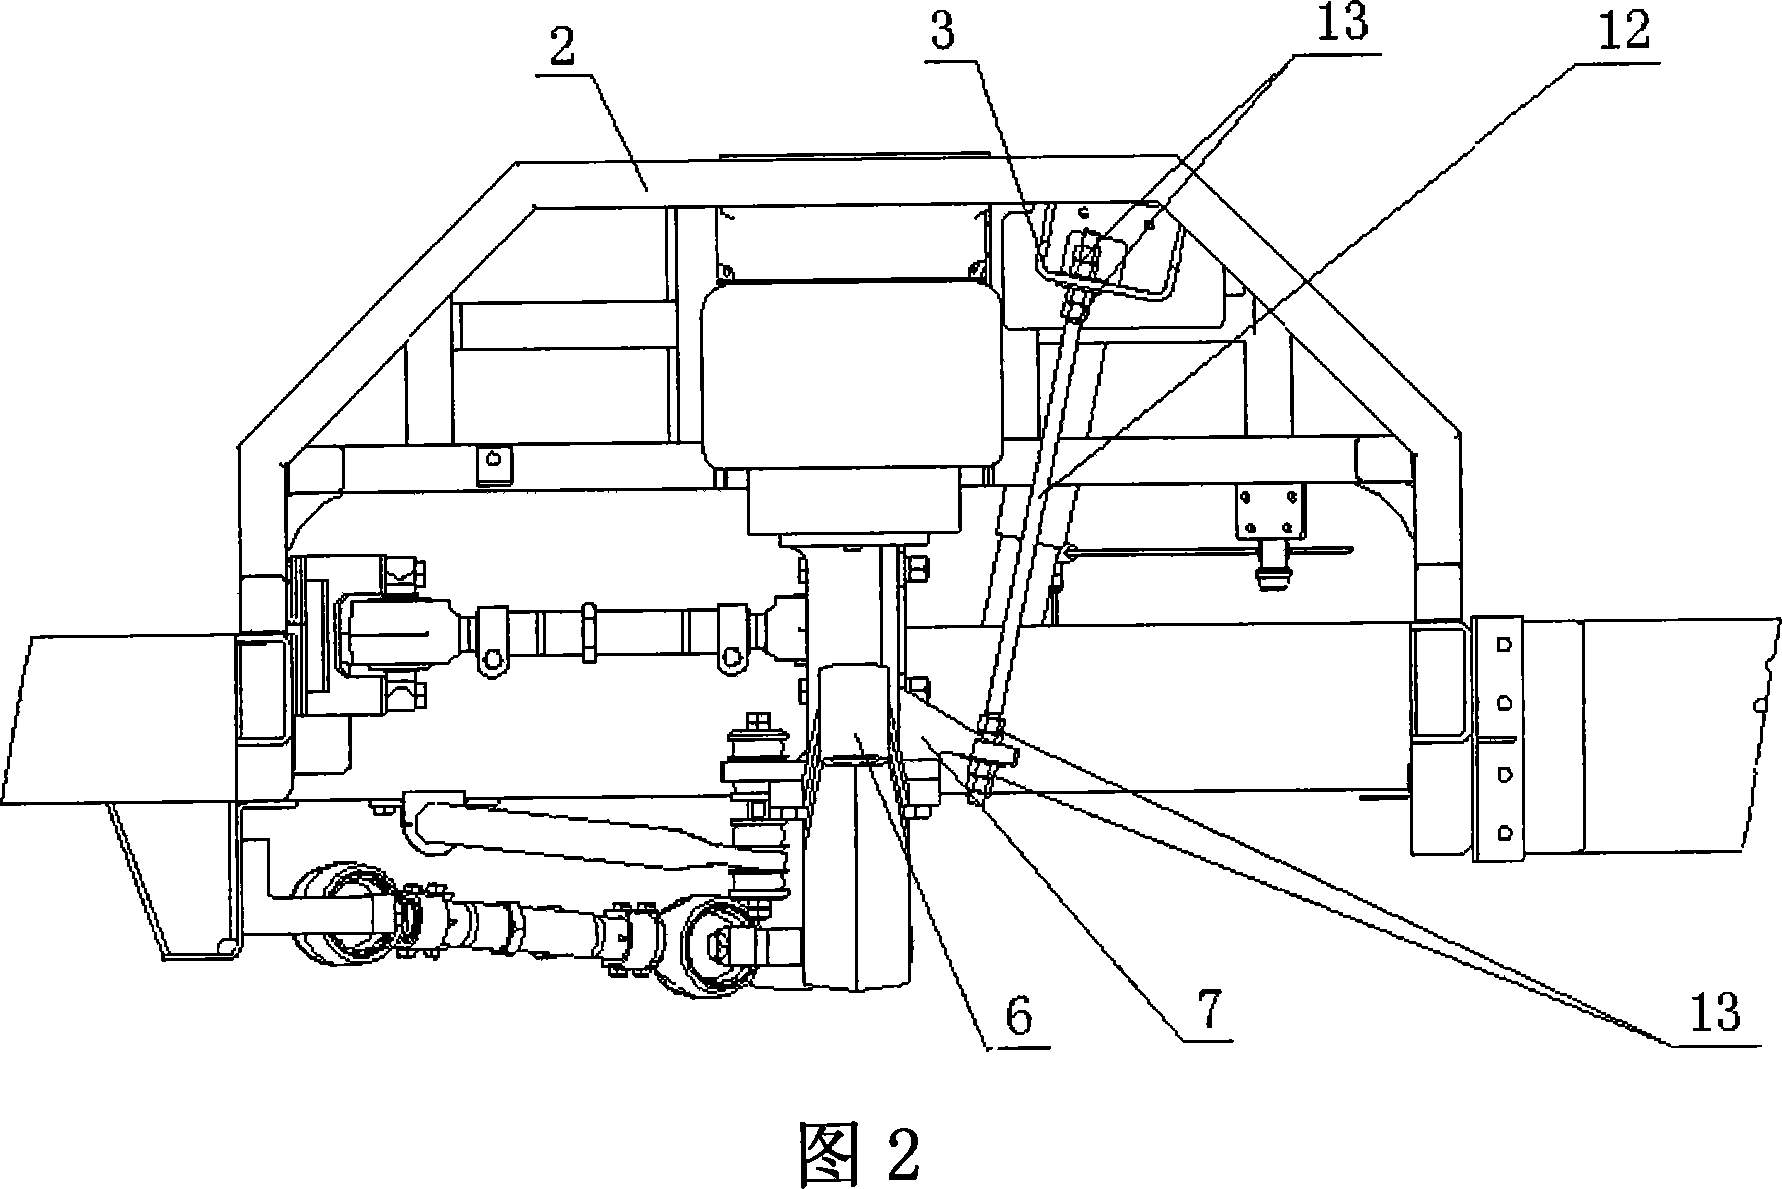 Mounting method for air spring vehicle chasis and its supporting rod